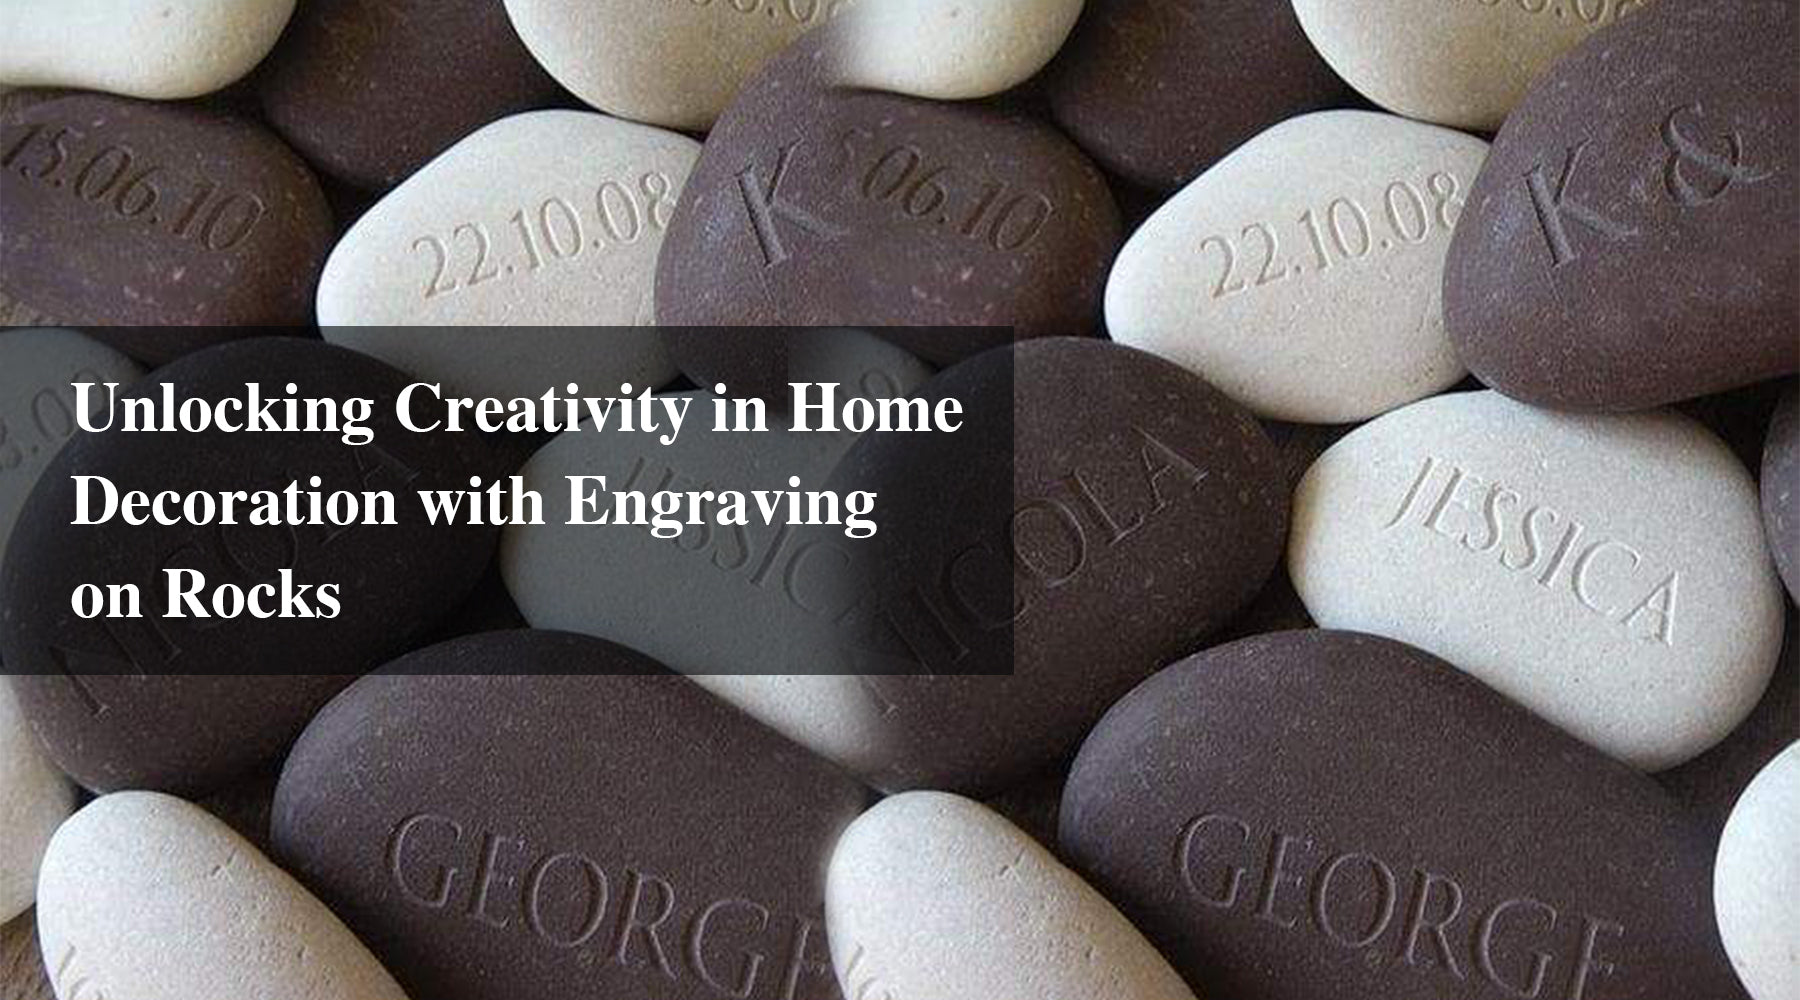 Unlocking Creativity in Home Decoration with Engraving on Rocks